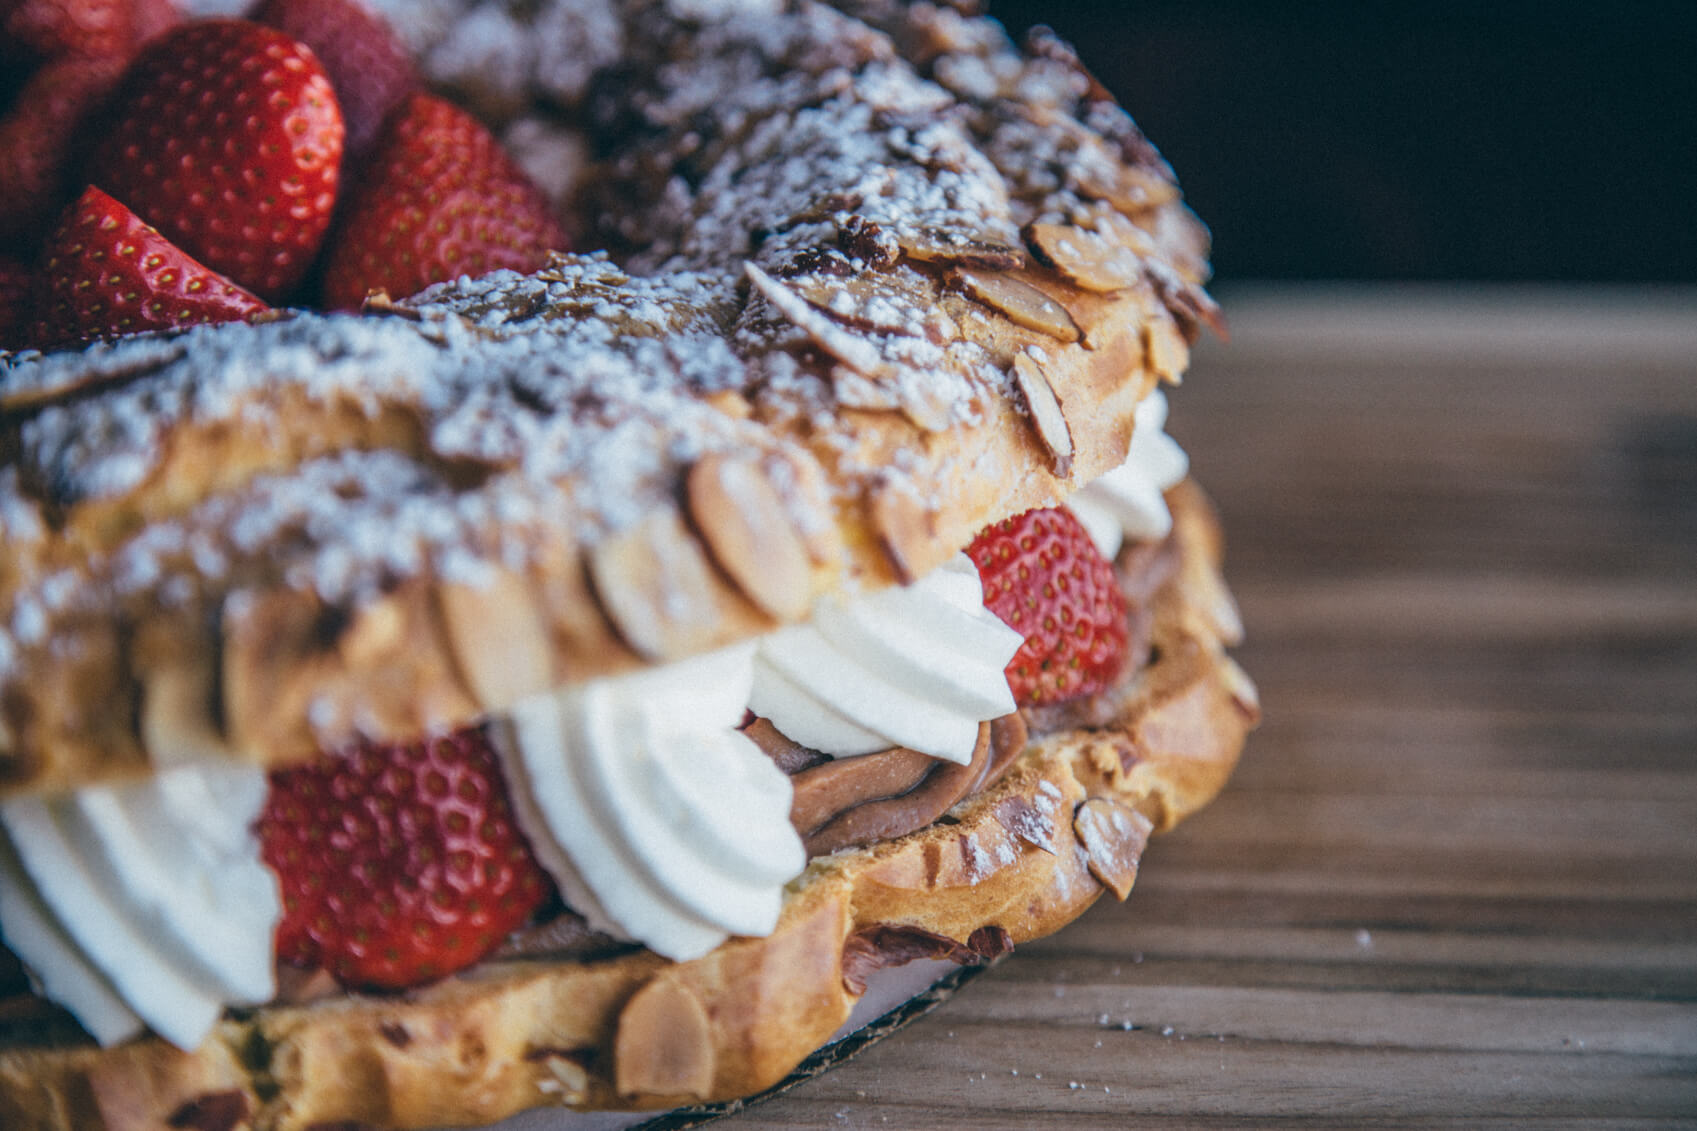 You can fill your Paris-Brest pastry with